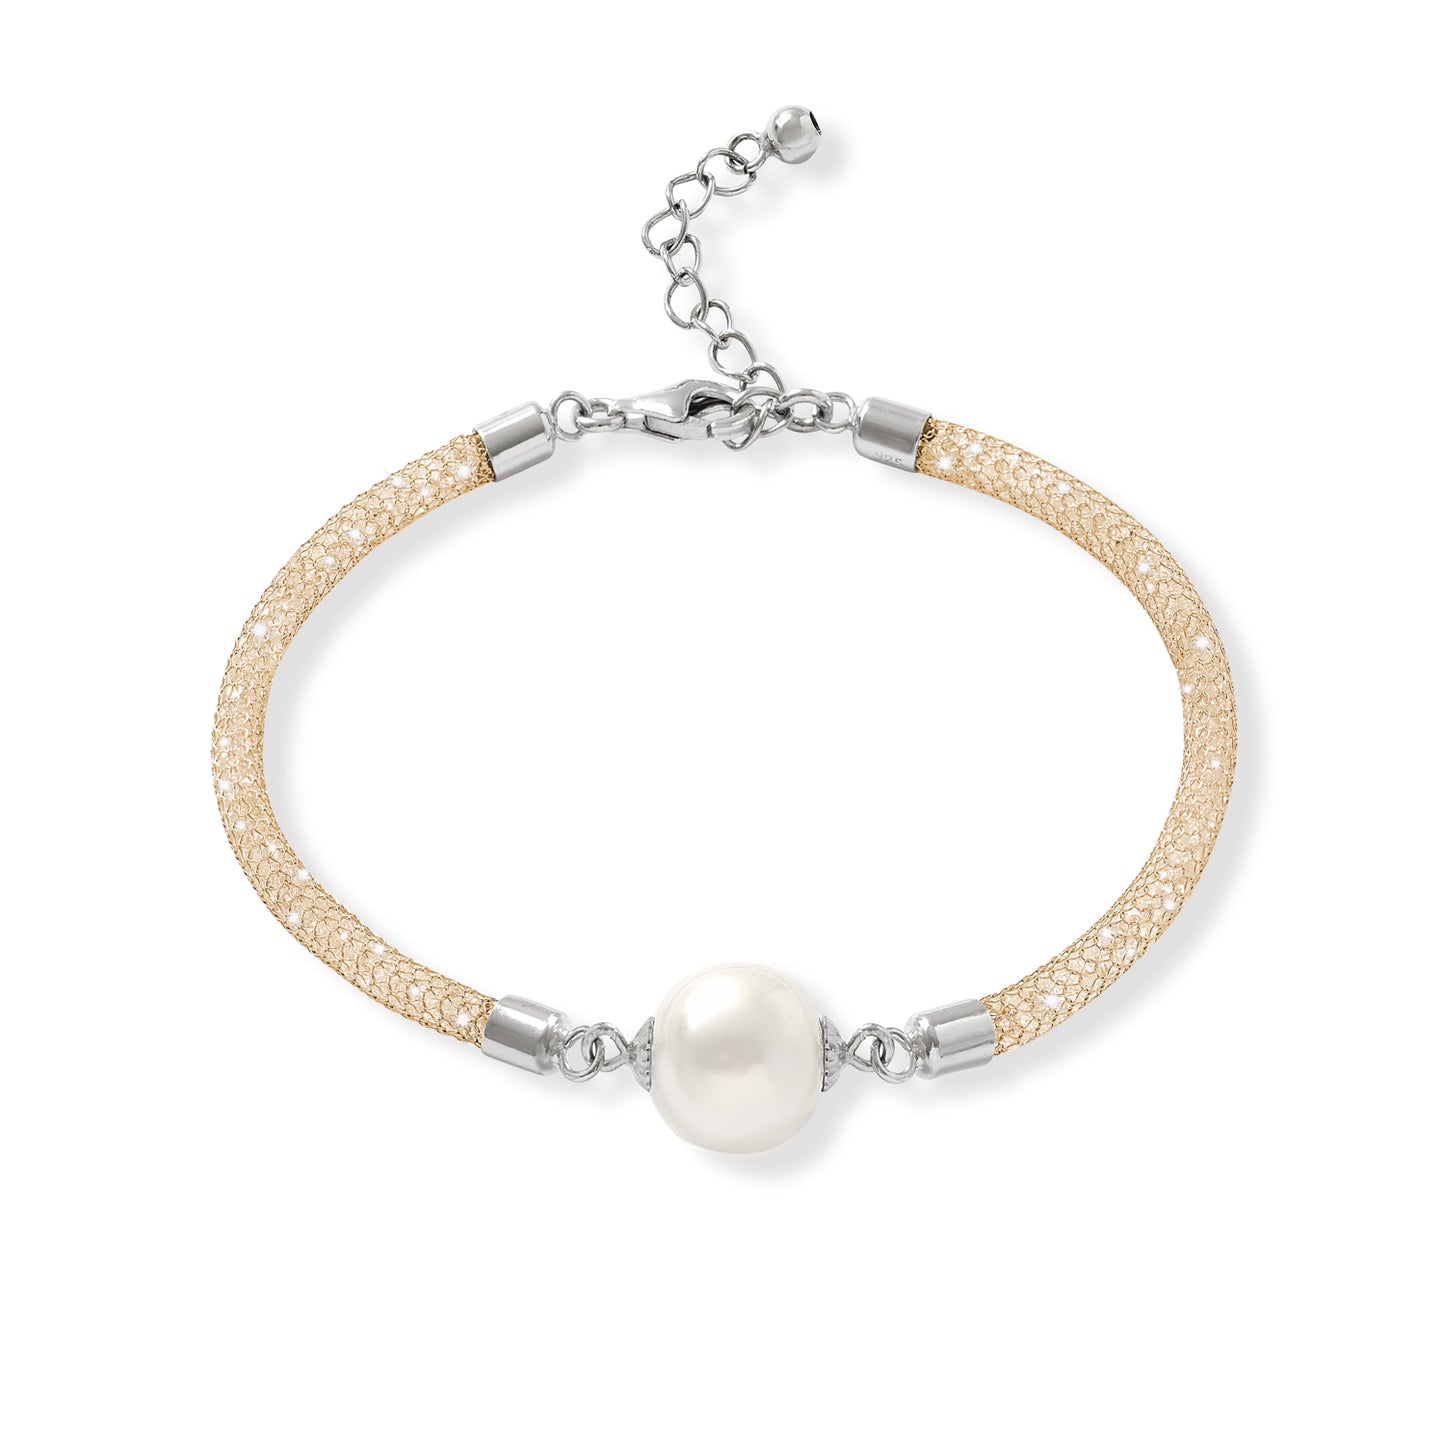 Credo gold mesh crystal bracelet with cultured freshwater pearl